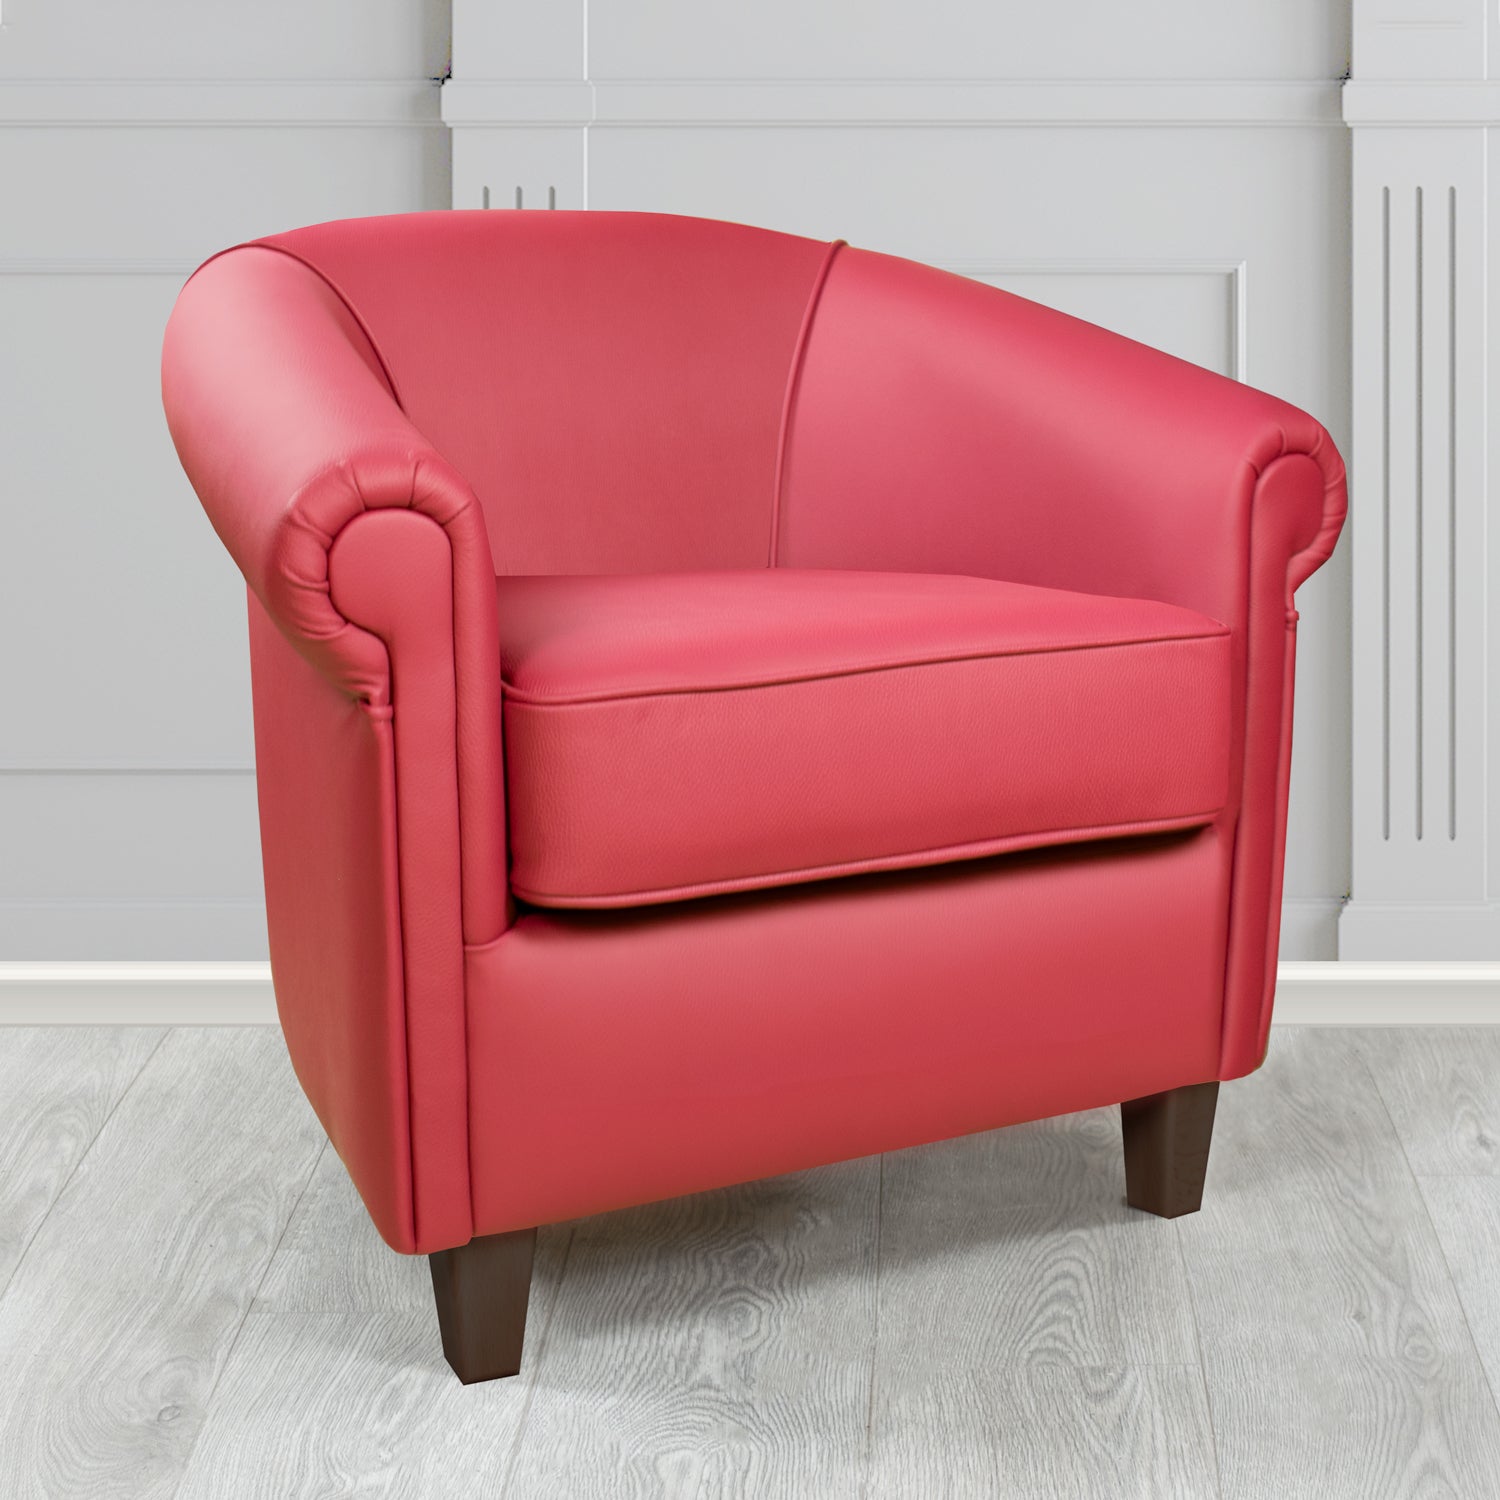 Siena Tub Chair in Crib 5 Shelly Velvet Red Genuine Leather - The Tub Chair Shop